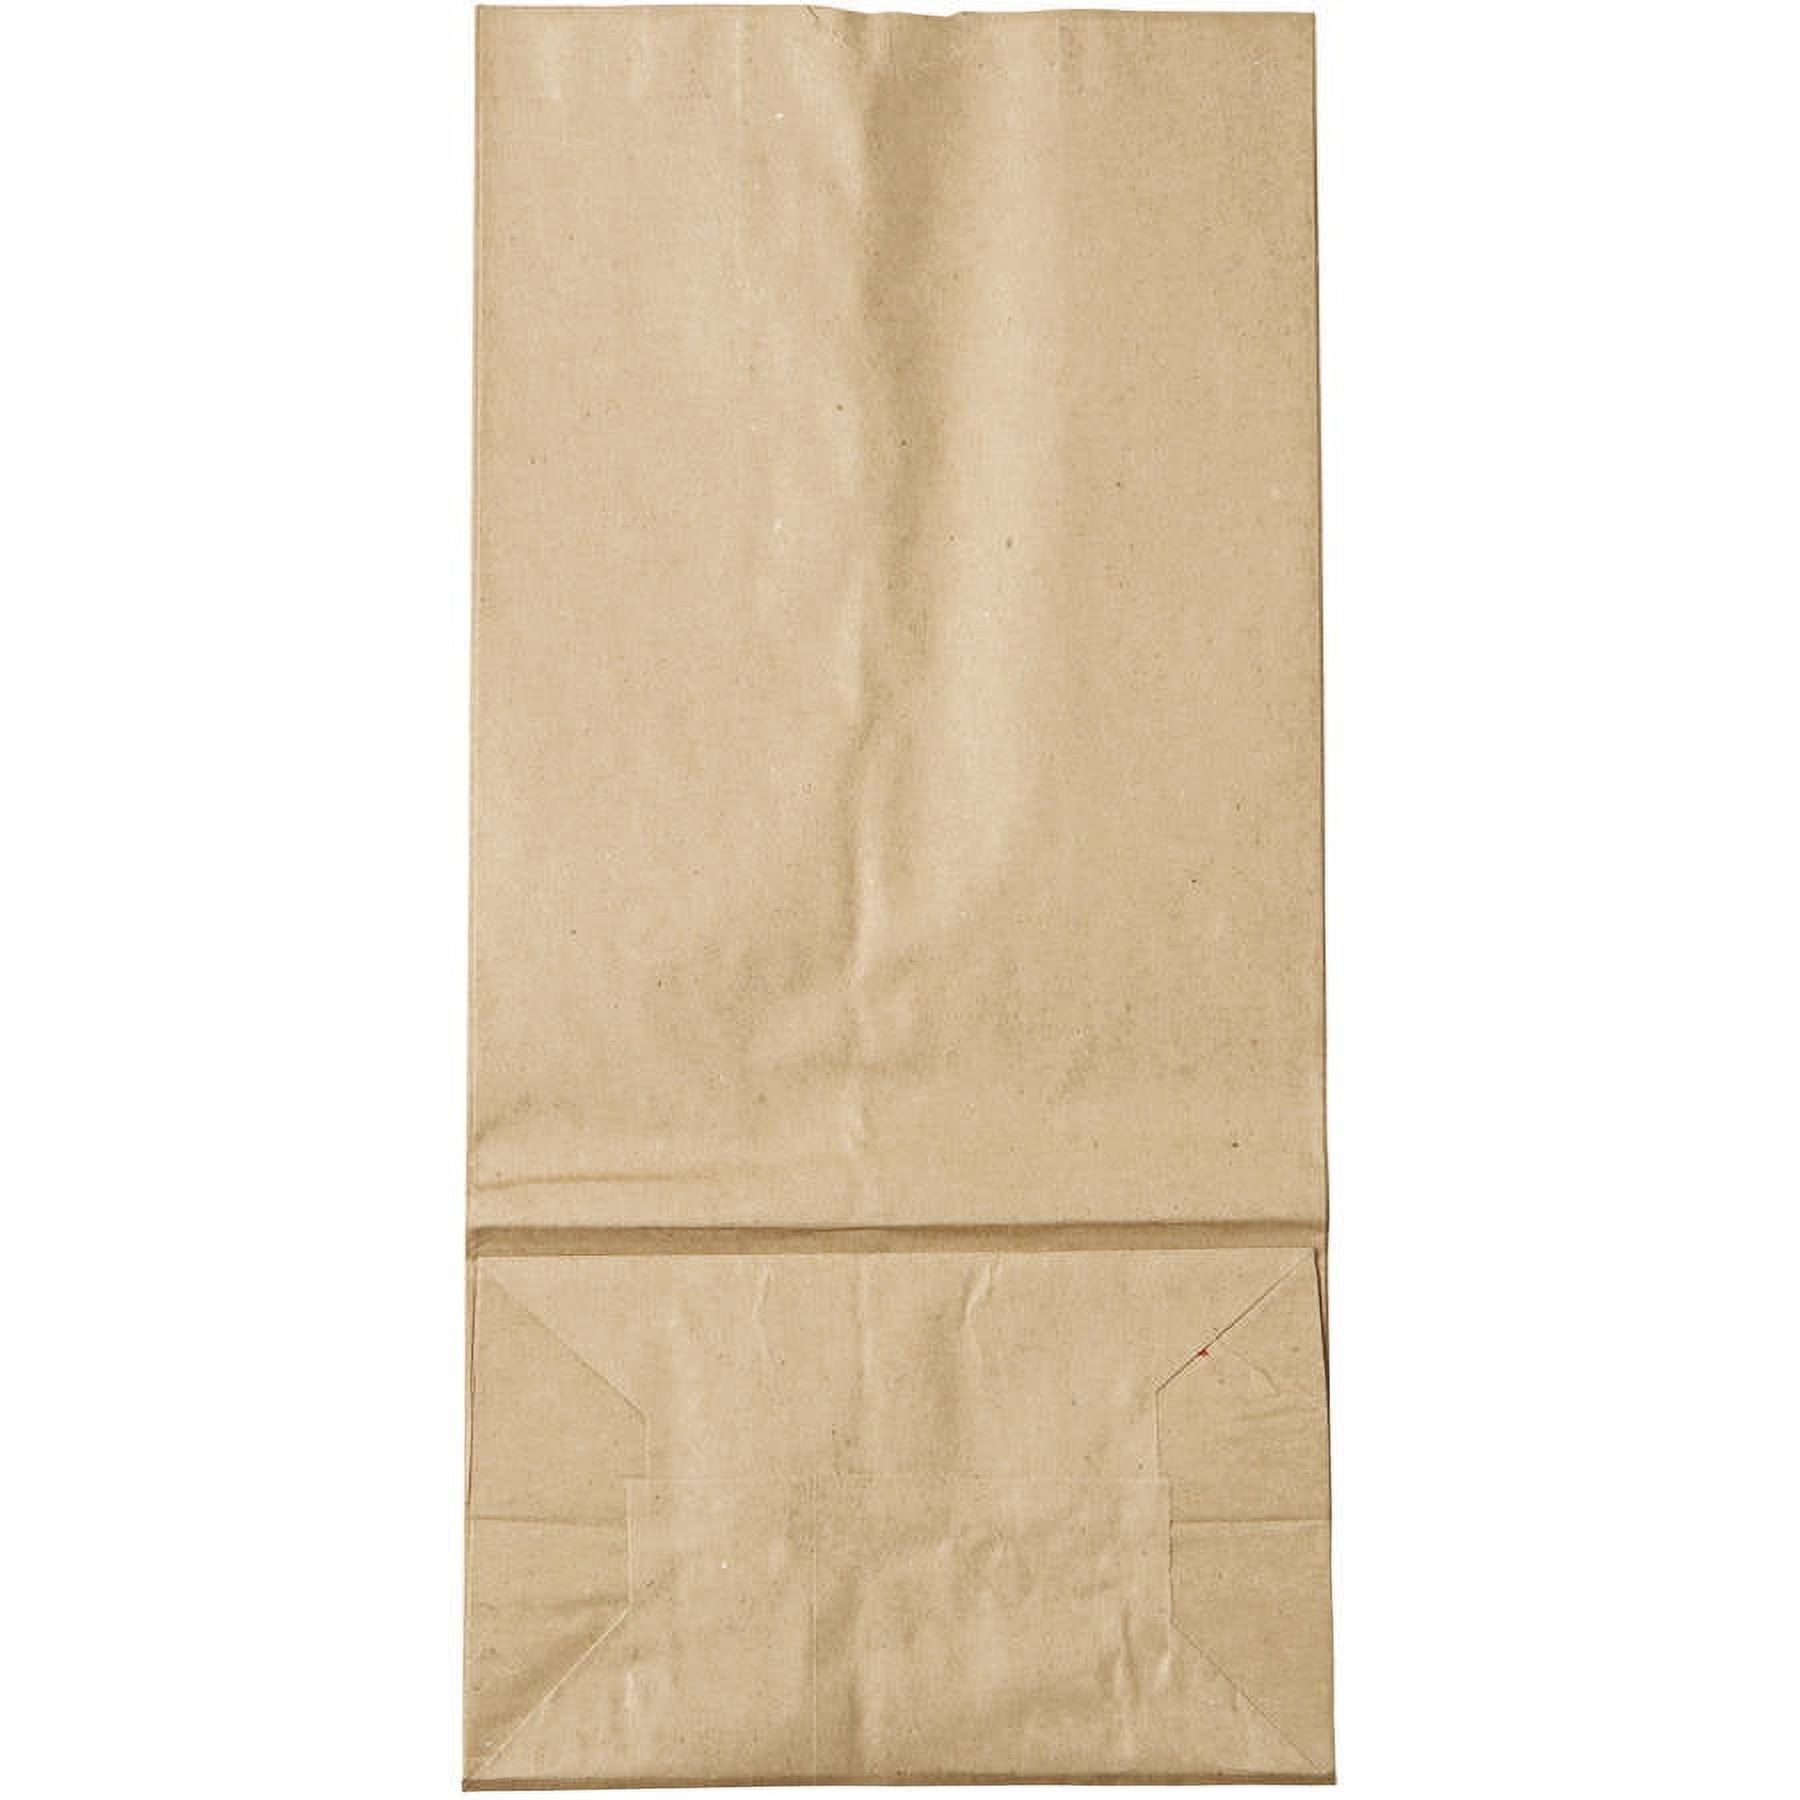 SteadyChef 18416 CPC 16 lbs Brown Grocery Bags - Case of 500